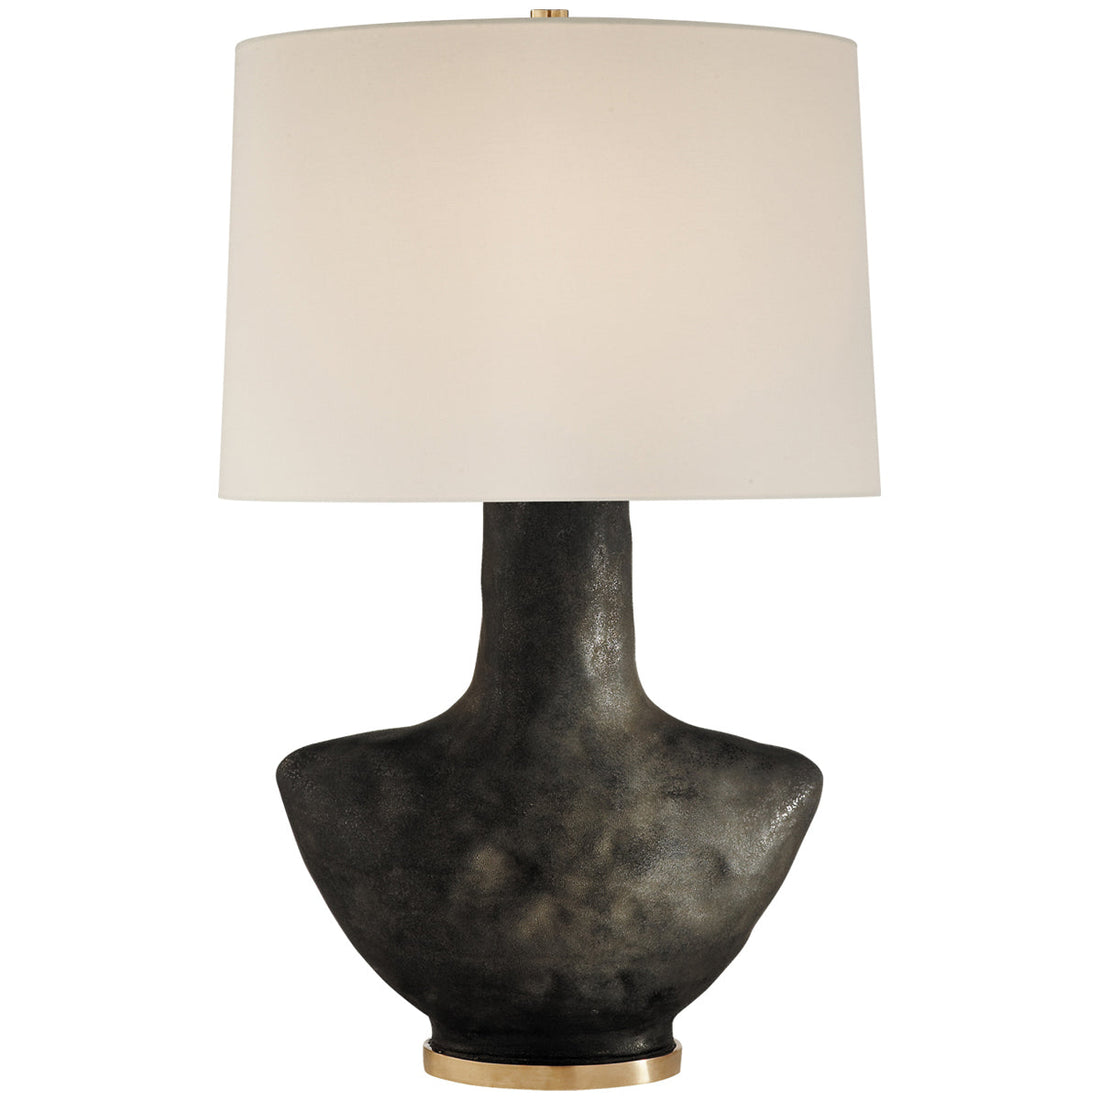 Visual Comfort Armato Small Table Lamp with Oval Linen Shade